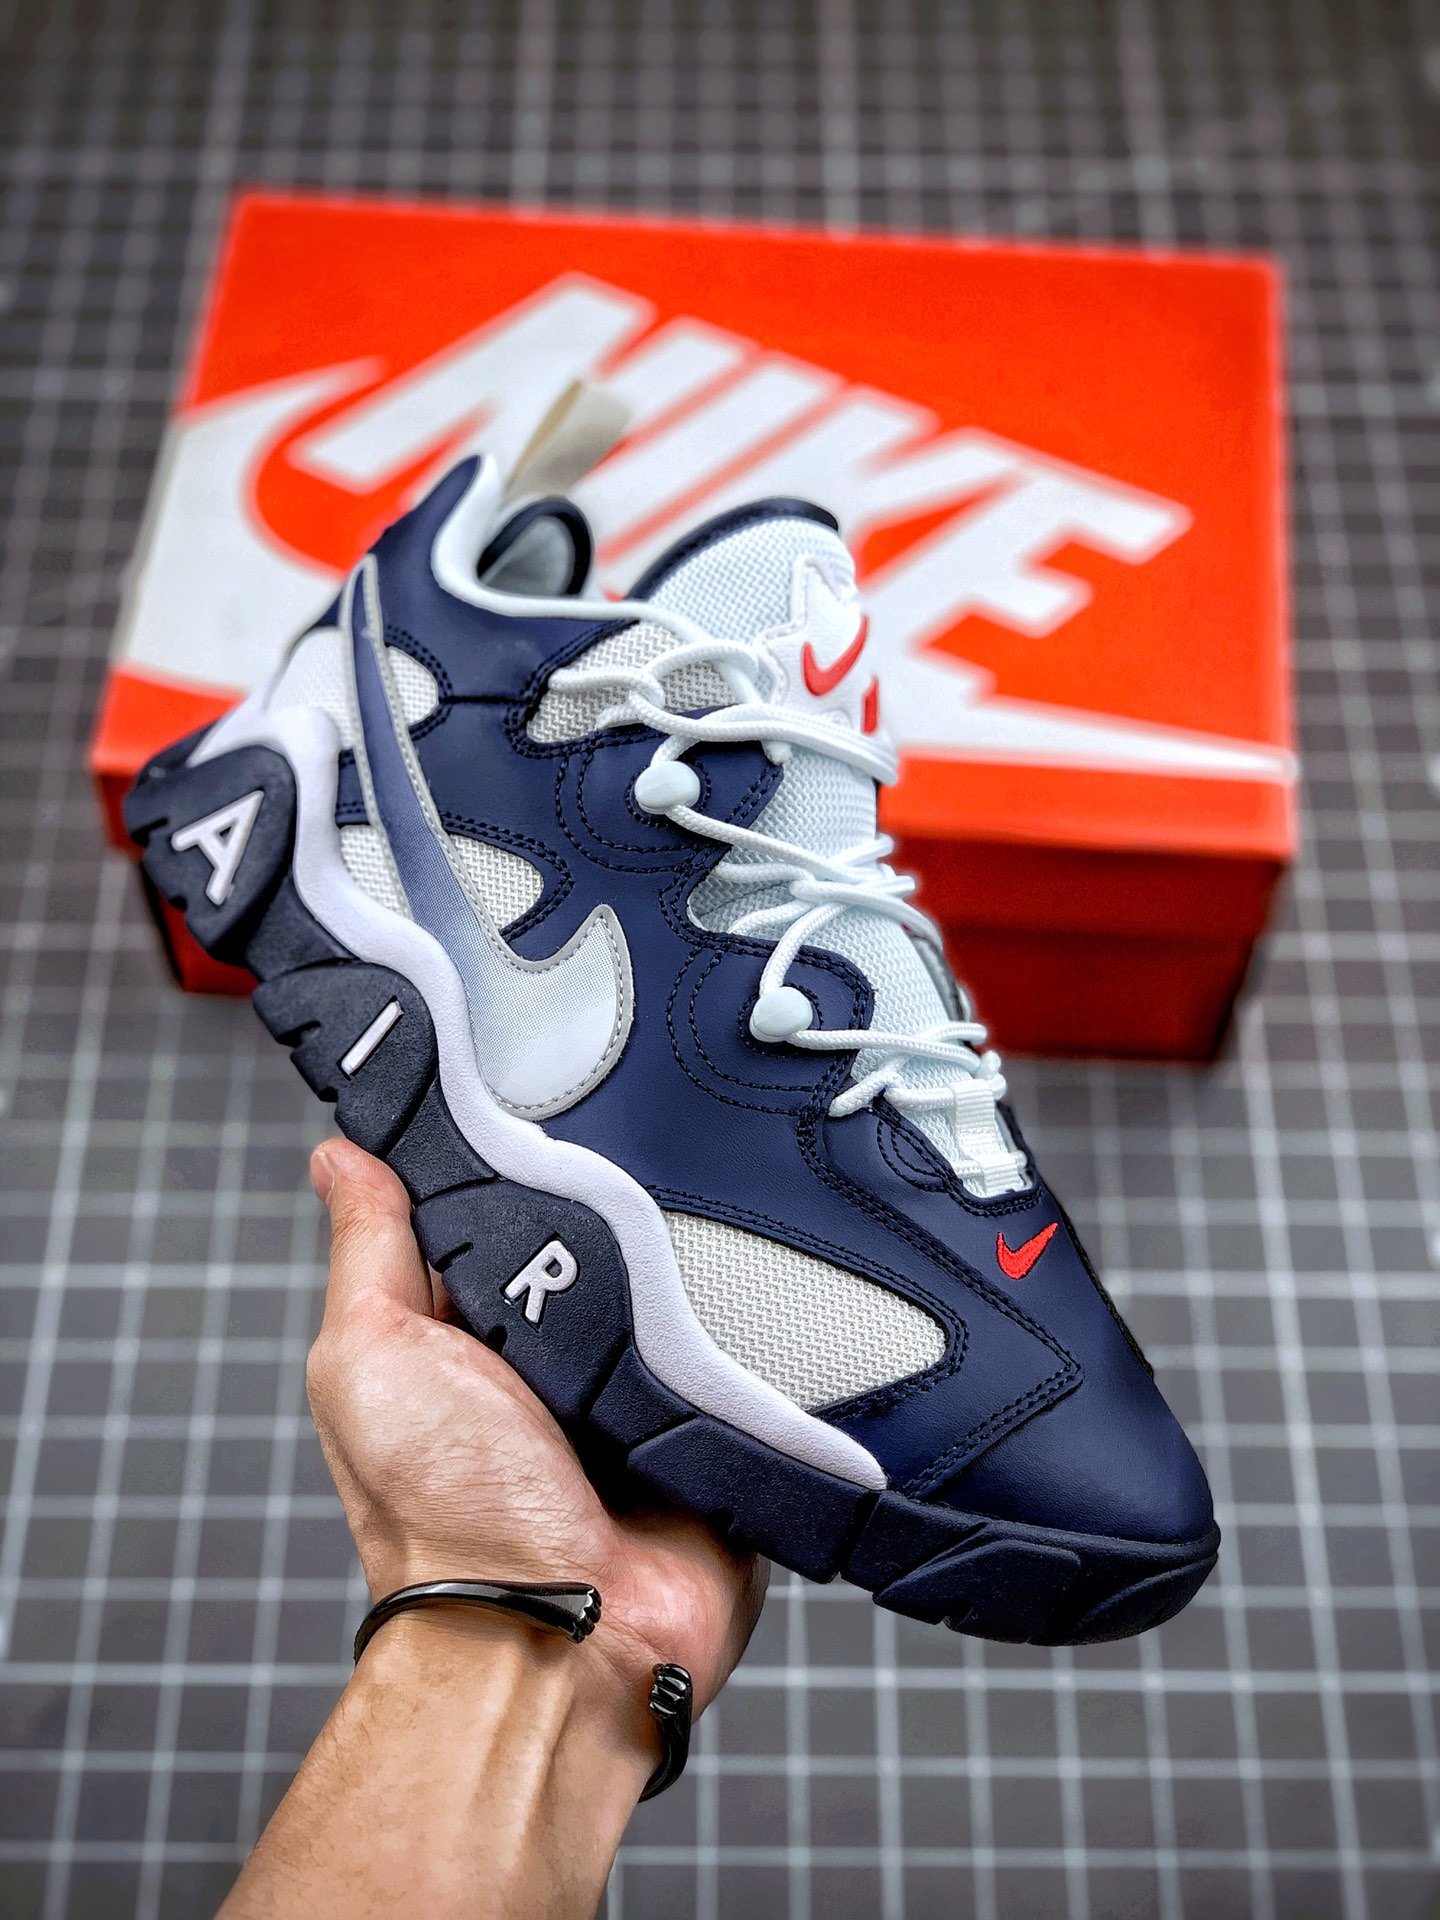 Nike Air Barrage Low "USA" Midnight Navy/White Shoes